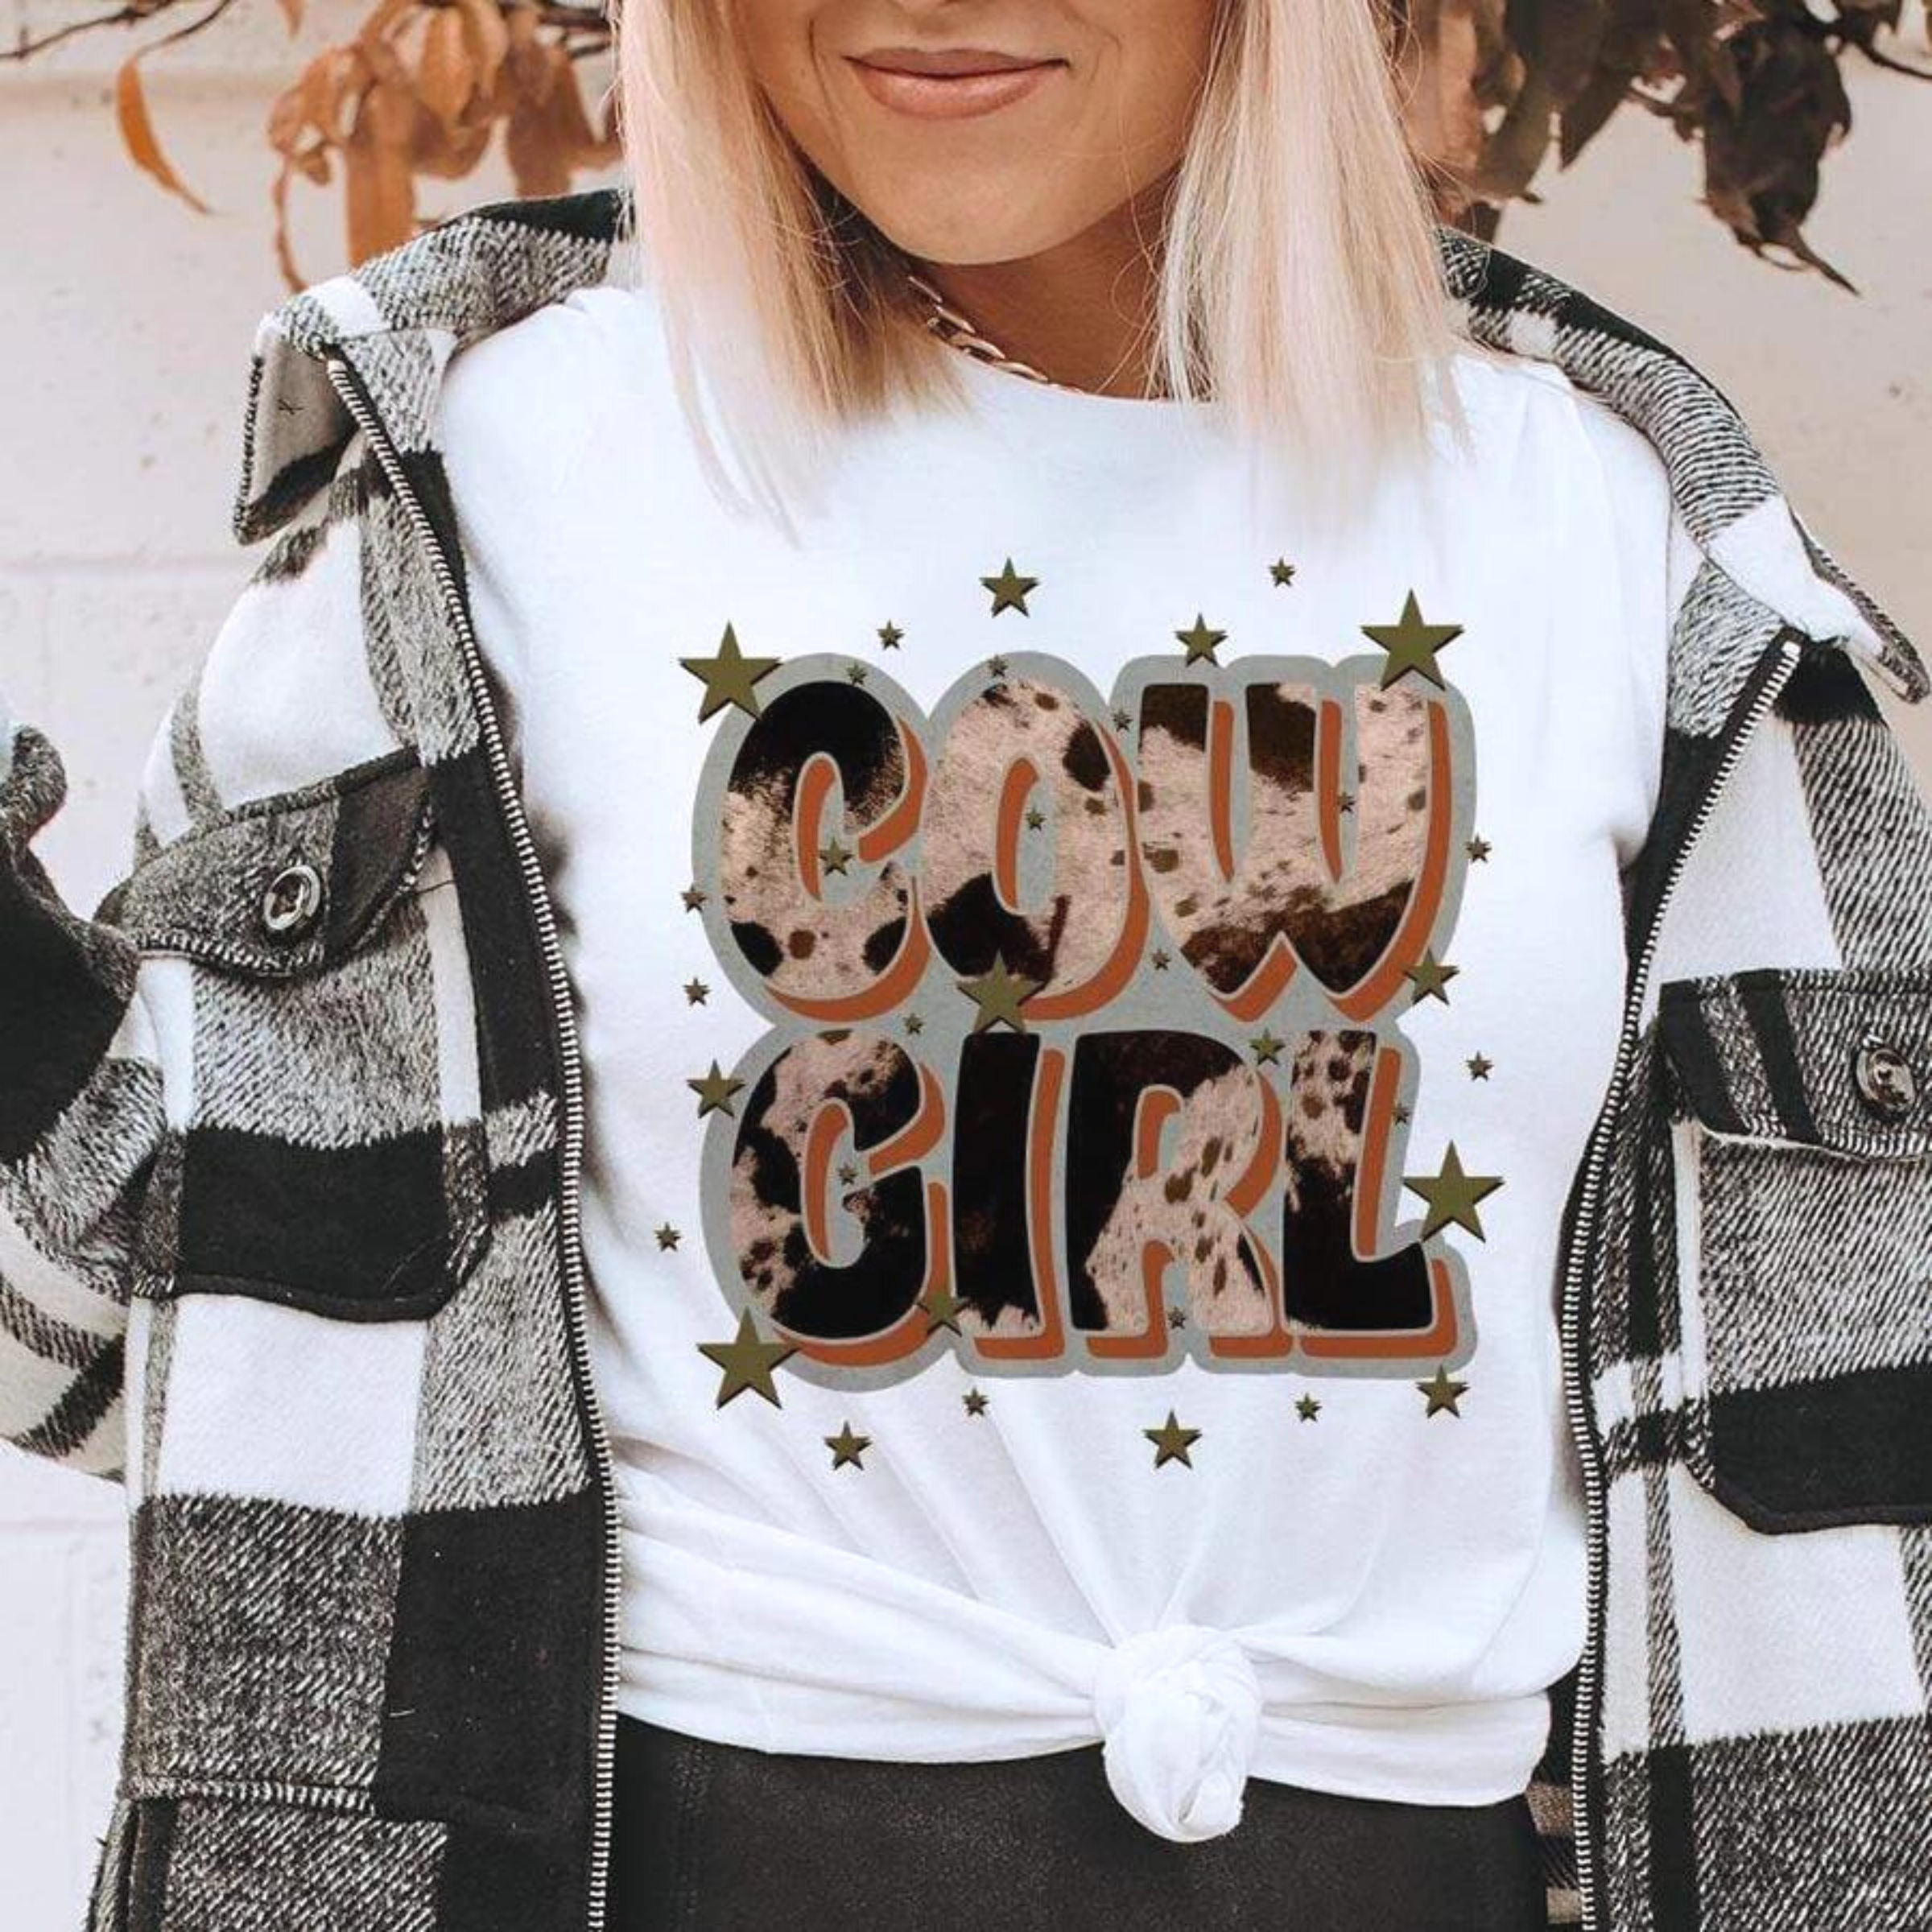 Model is wearing a white tee shirt that says "Cowgirl" in a cowhide print with stars.